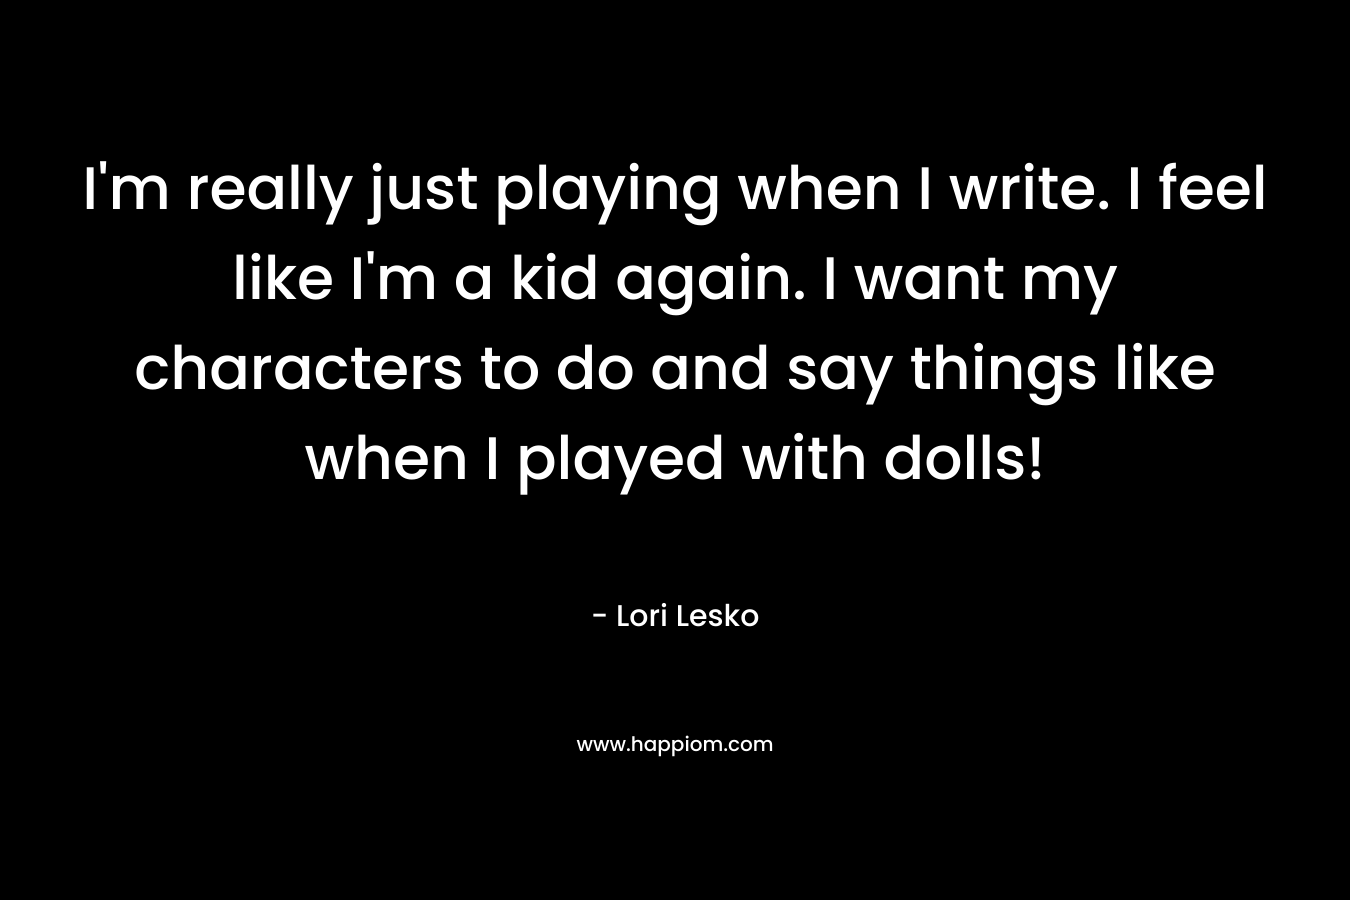 I’m really just playing when I write. I feel like I’m a kid again. I want my characters to do and say things like when I played with dolls! – Lori Lesko